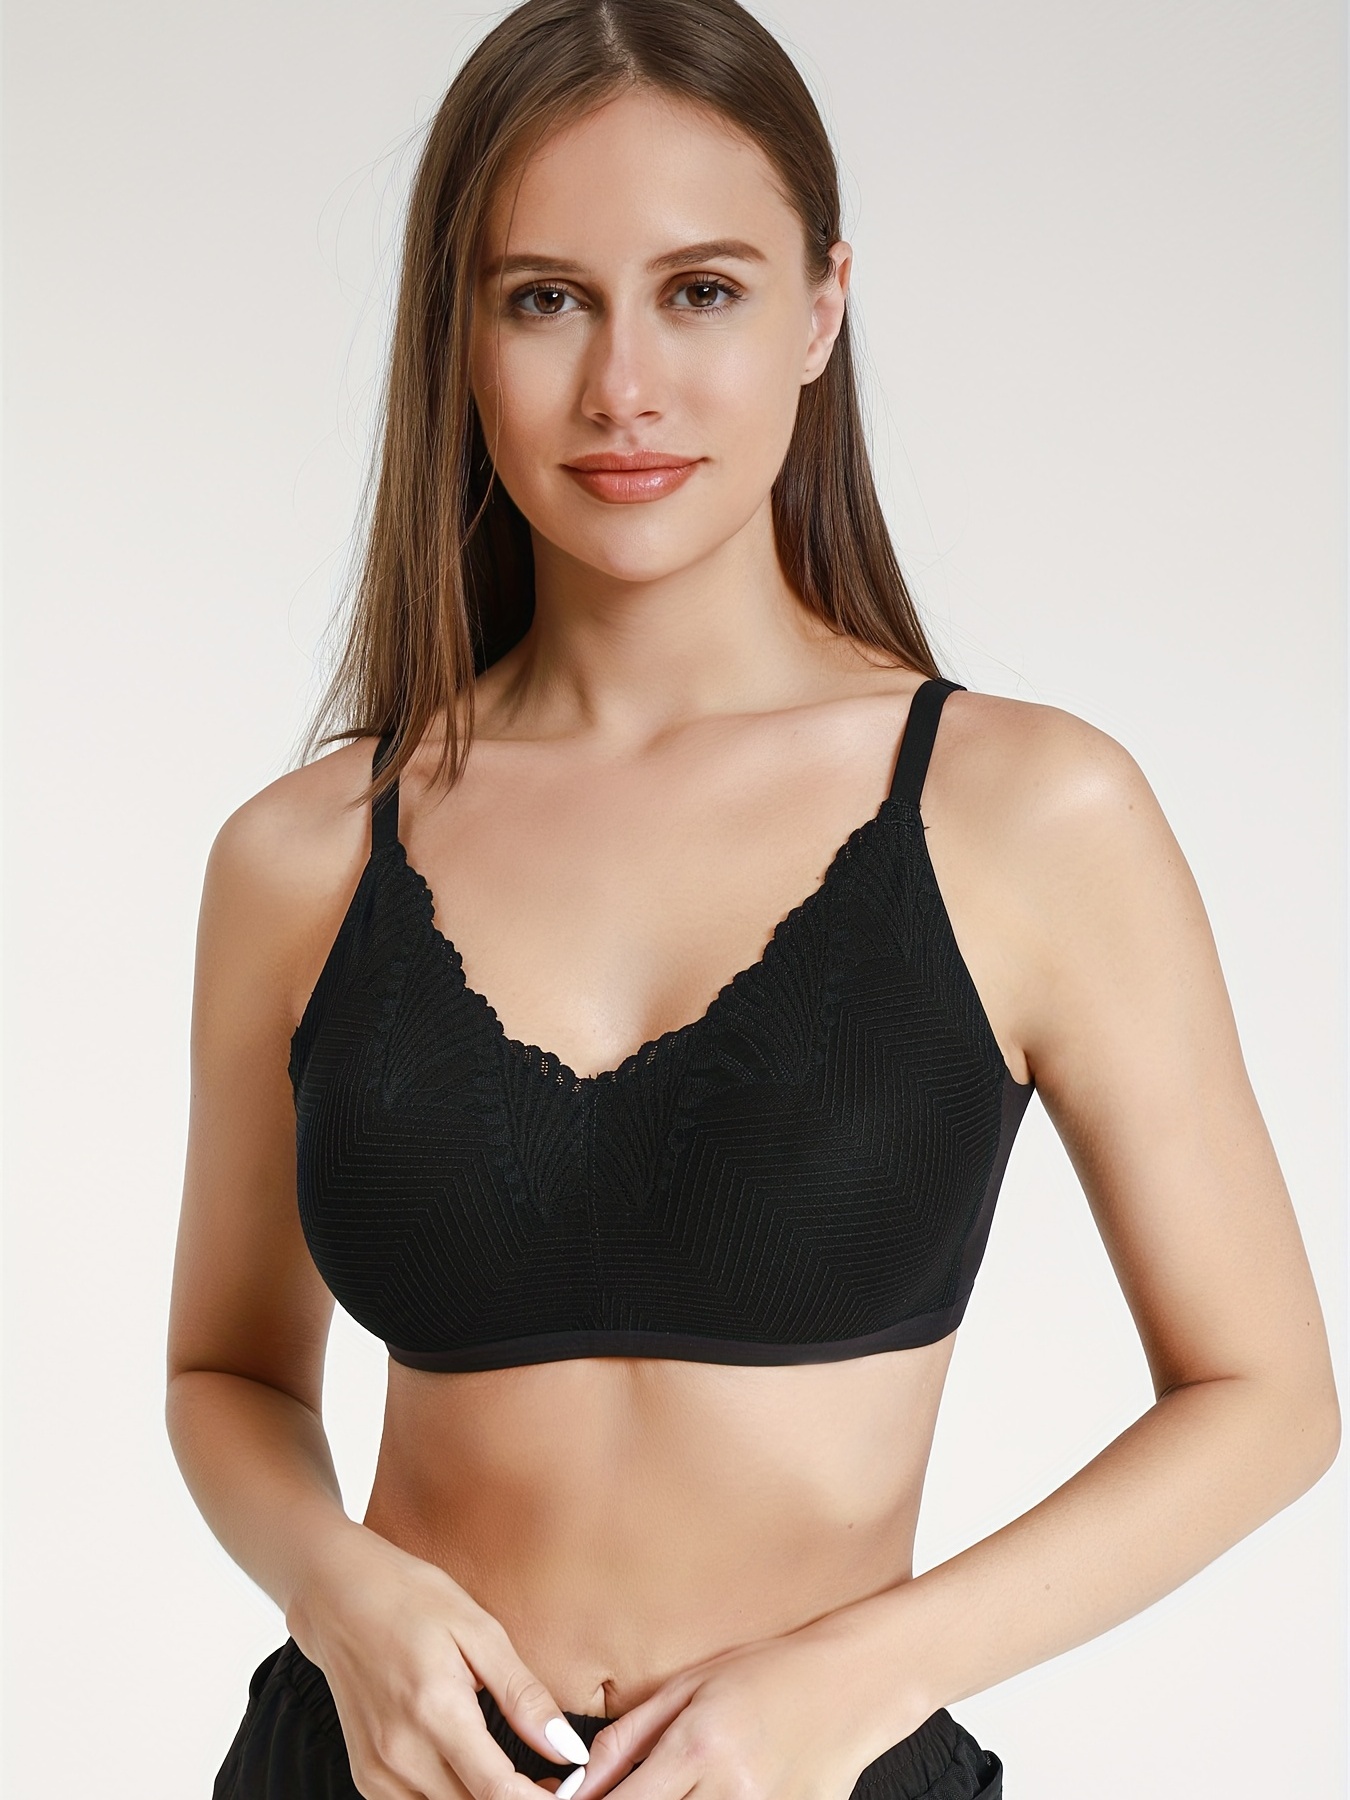 Women'S Lace Wireless Thin Padded Bra With Anti-Slip Design For Large Busts